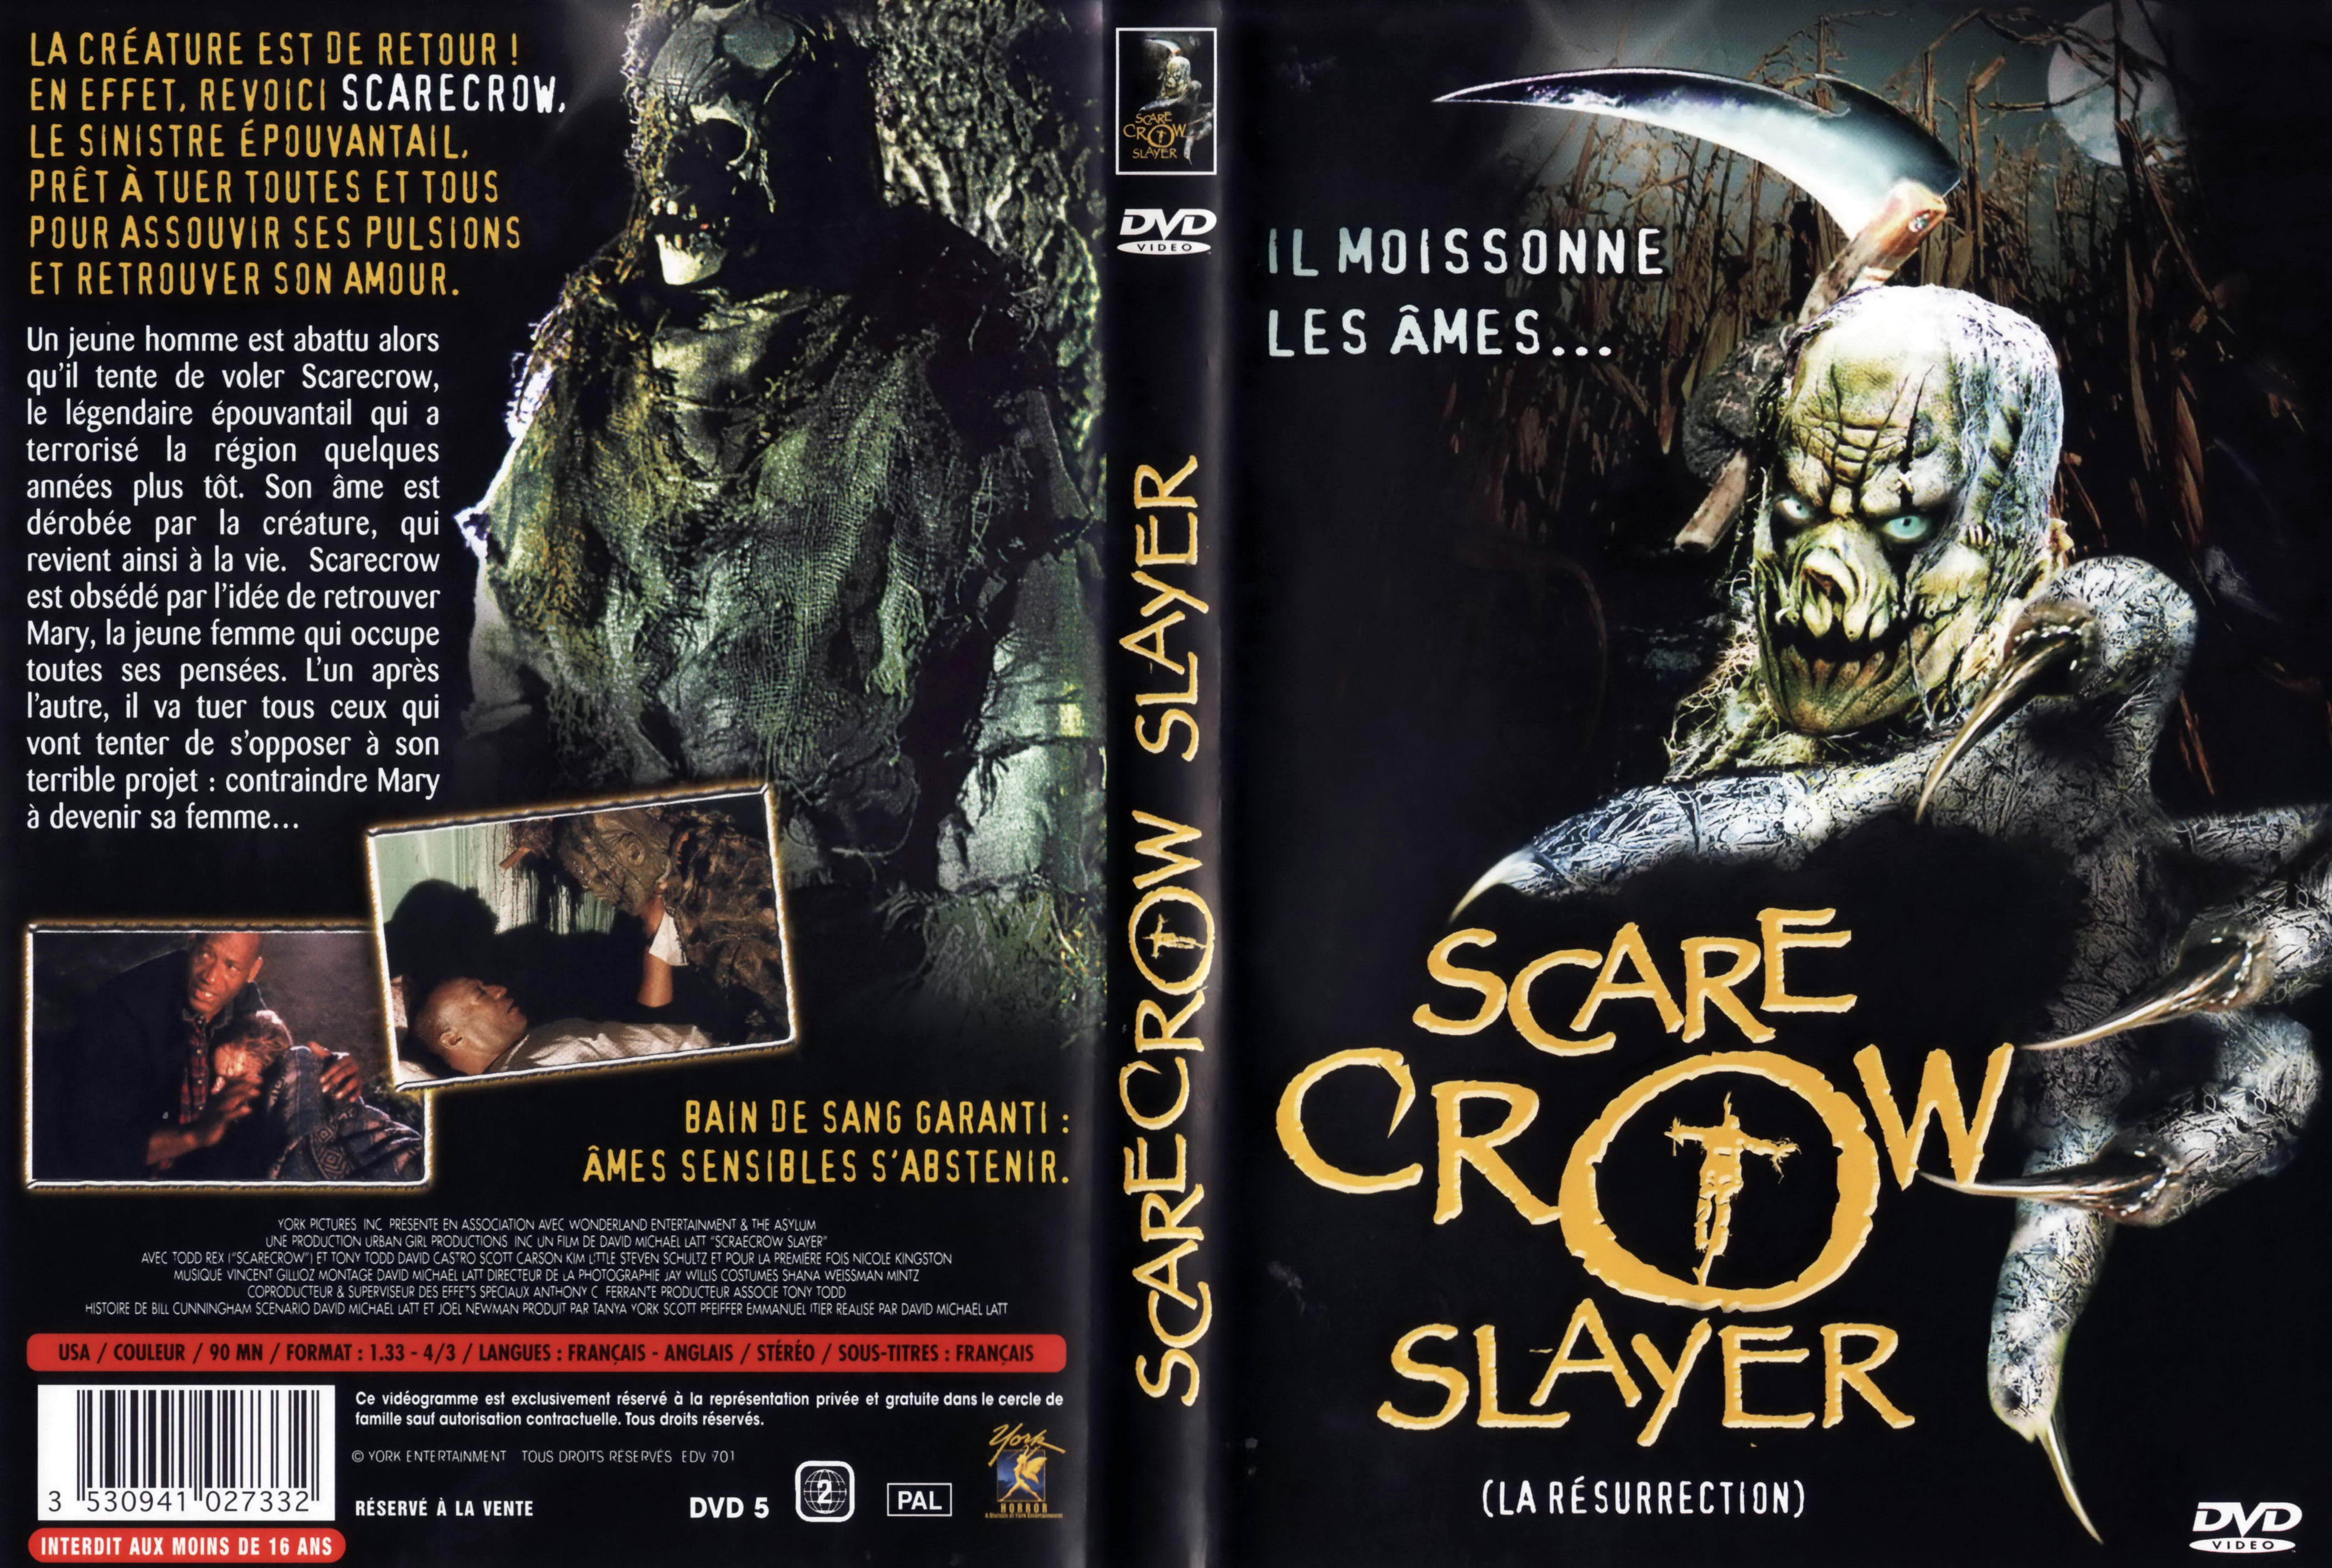 Jaquette DVD Scare crow slayer